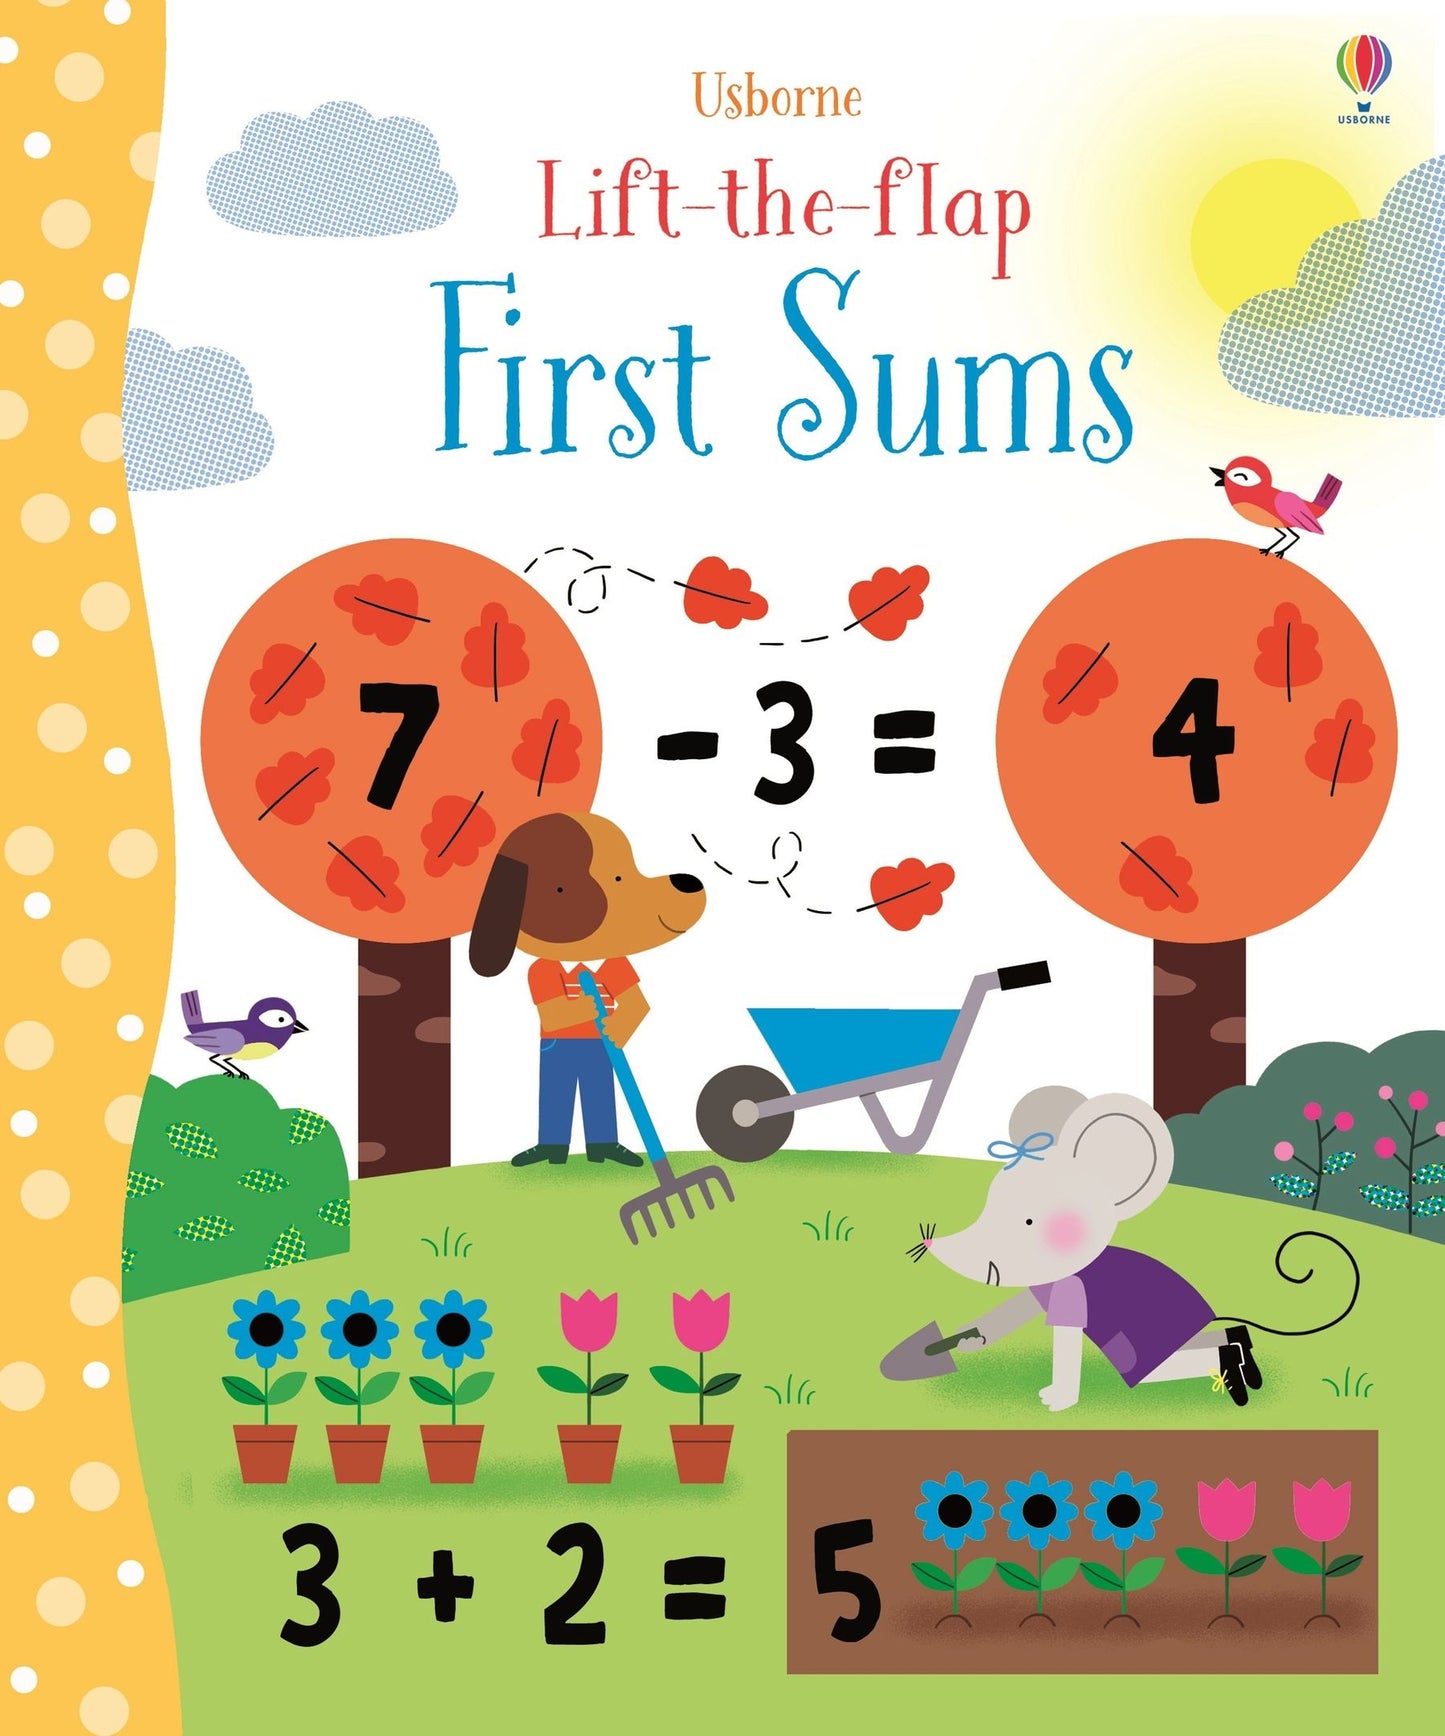 Lift-the-flap: First Sums